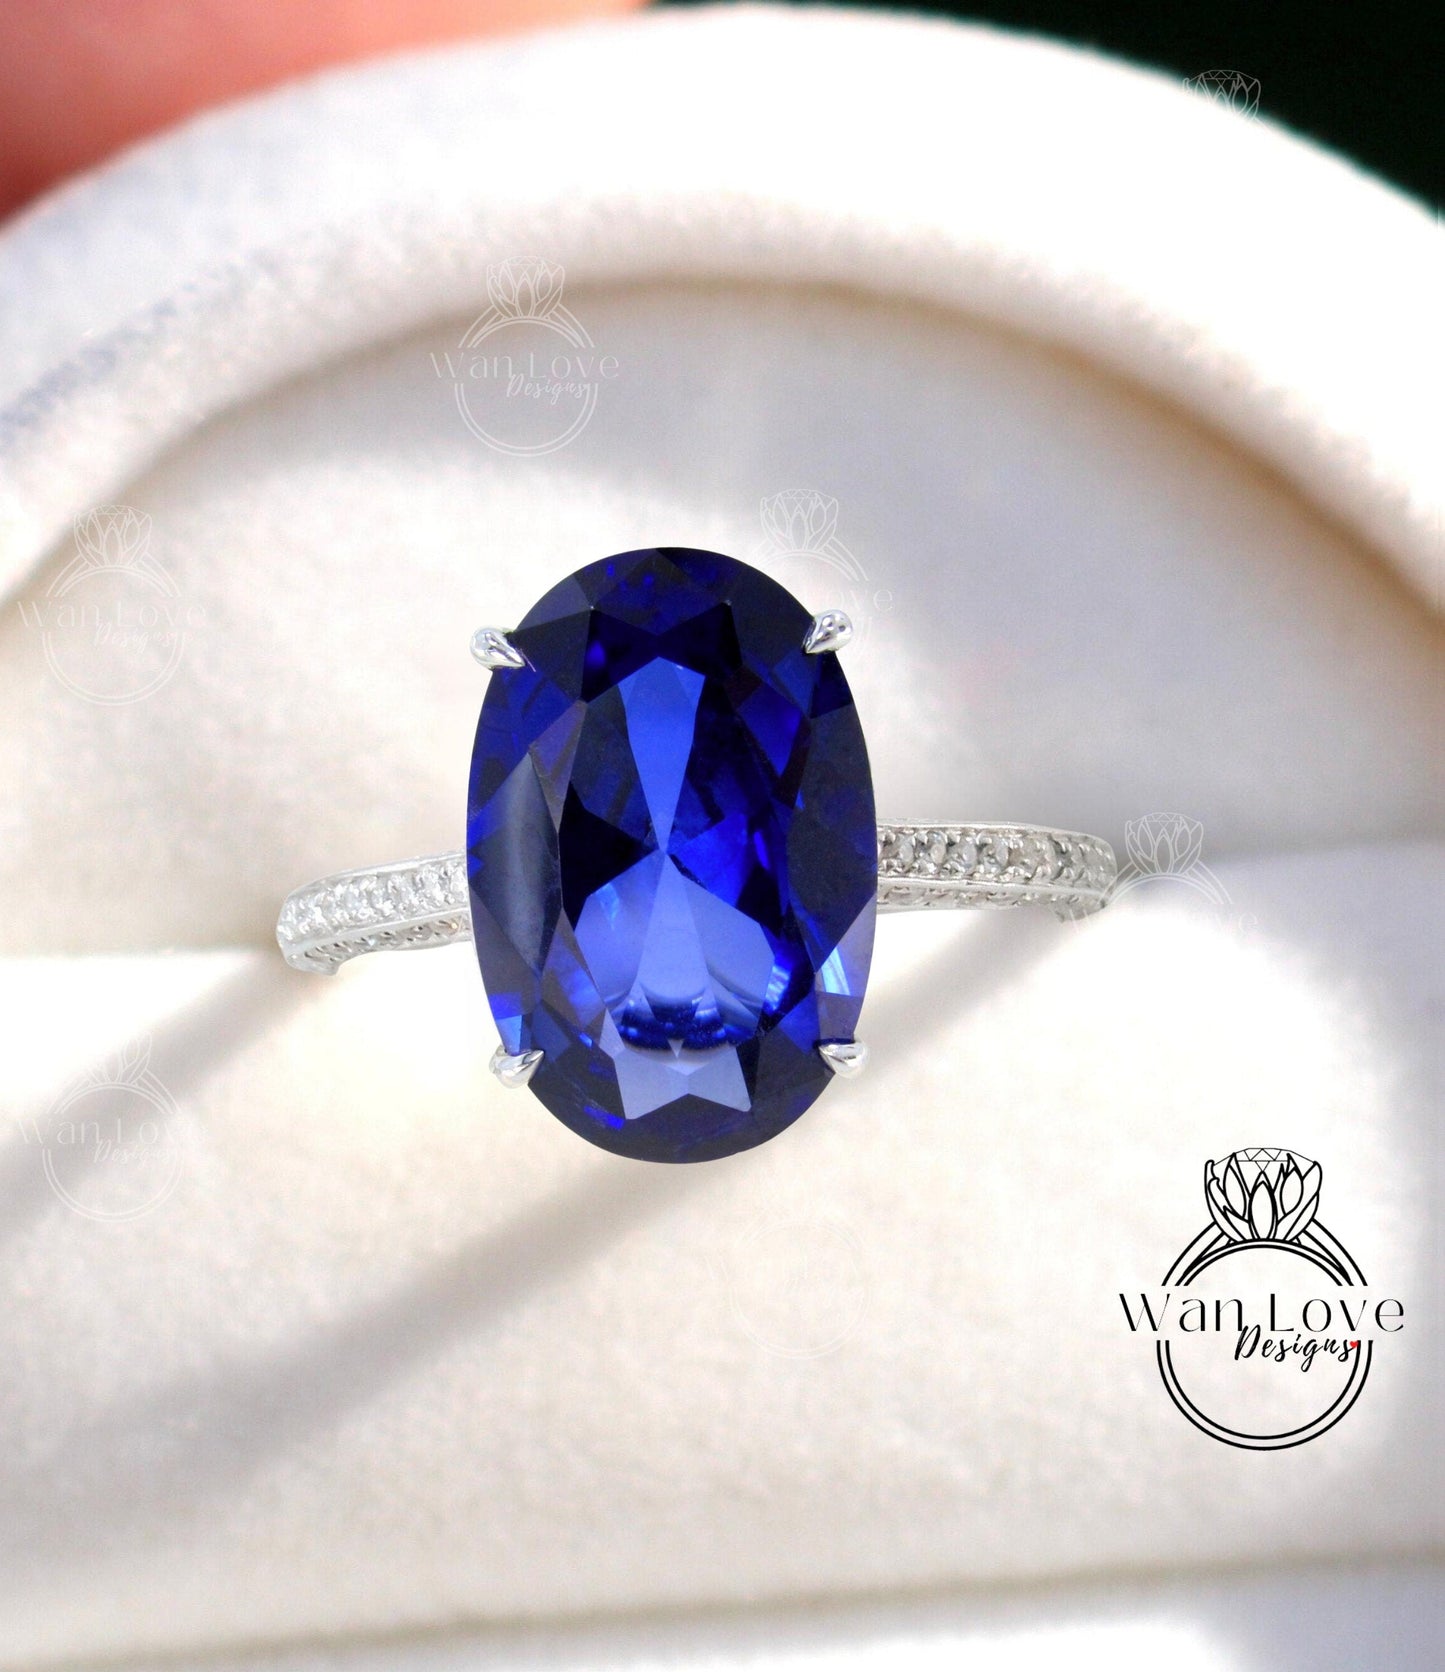 9ct Blue Sapphire diamond Celebrity style engagement ring Oval side halo ring 14k gold almost eternity band bridal ring Promise Anniversary Wan Love Designs